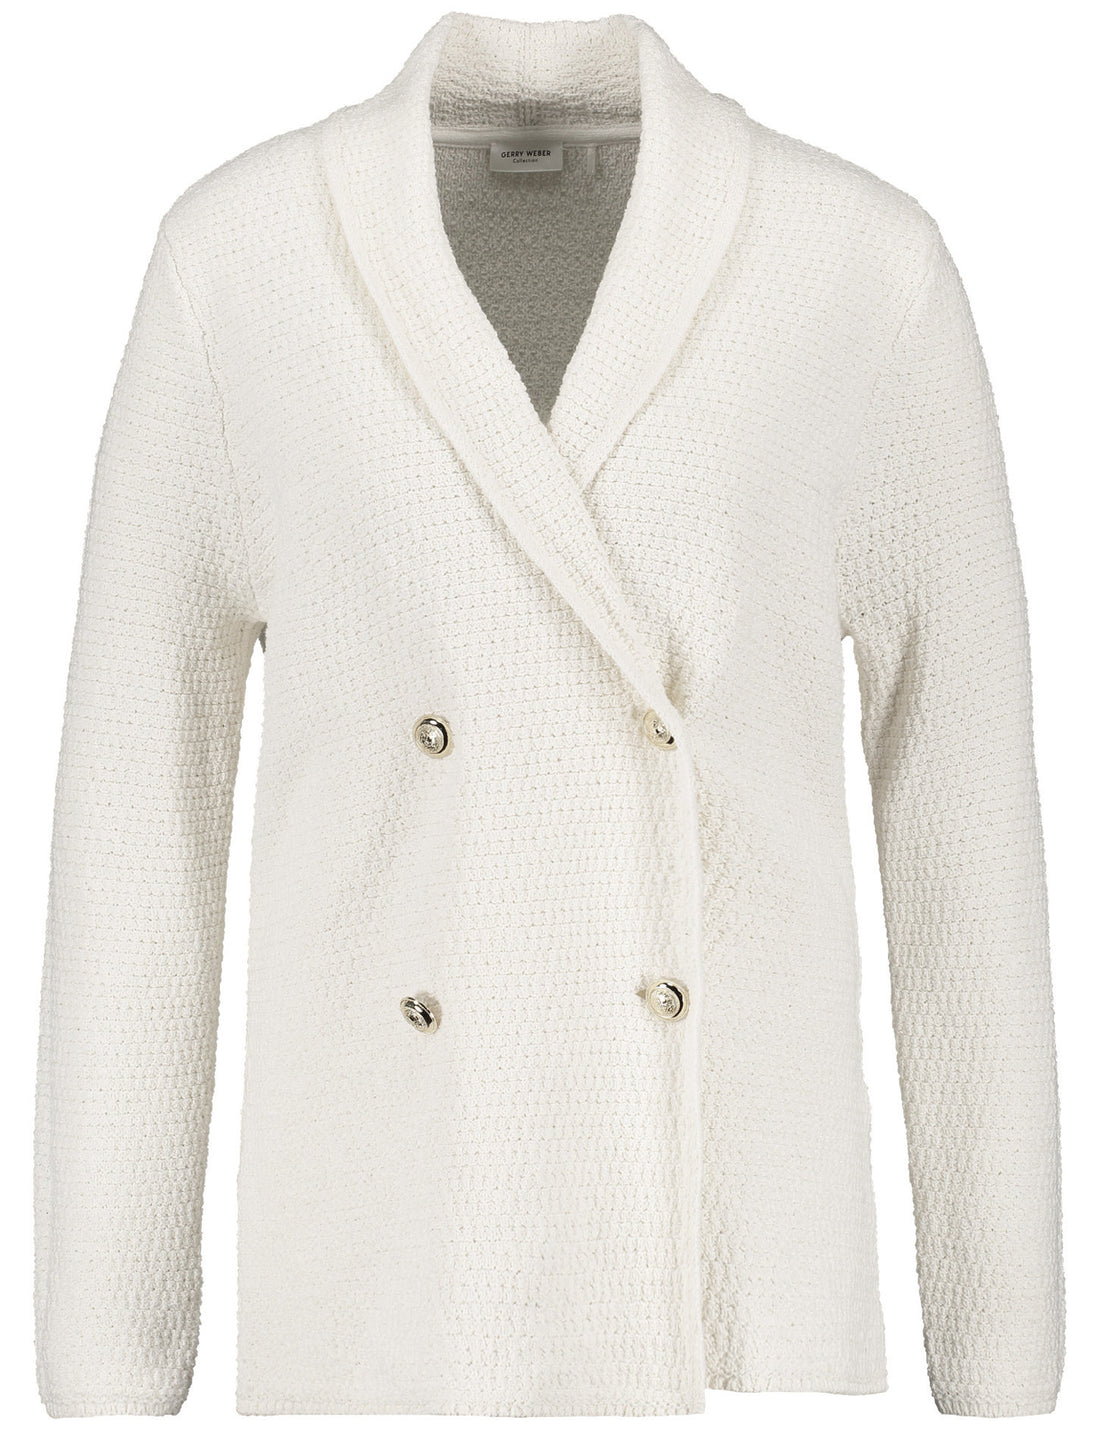 Cardigan In A Textured Knit With A Double-Breasted Button Placket_330019-35738_99700_02